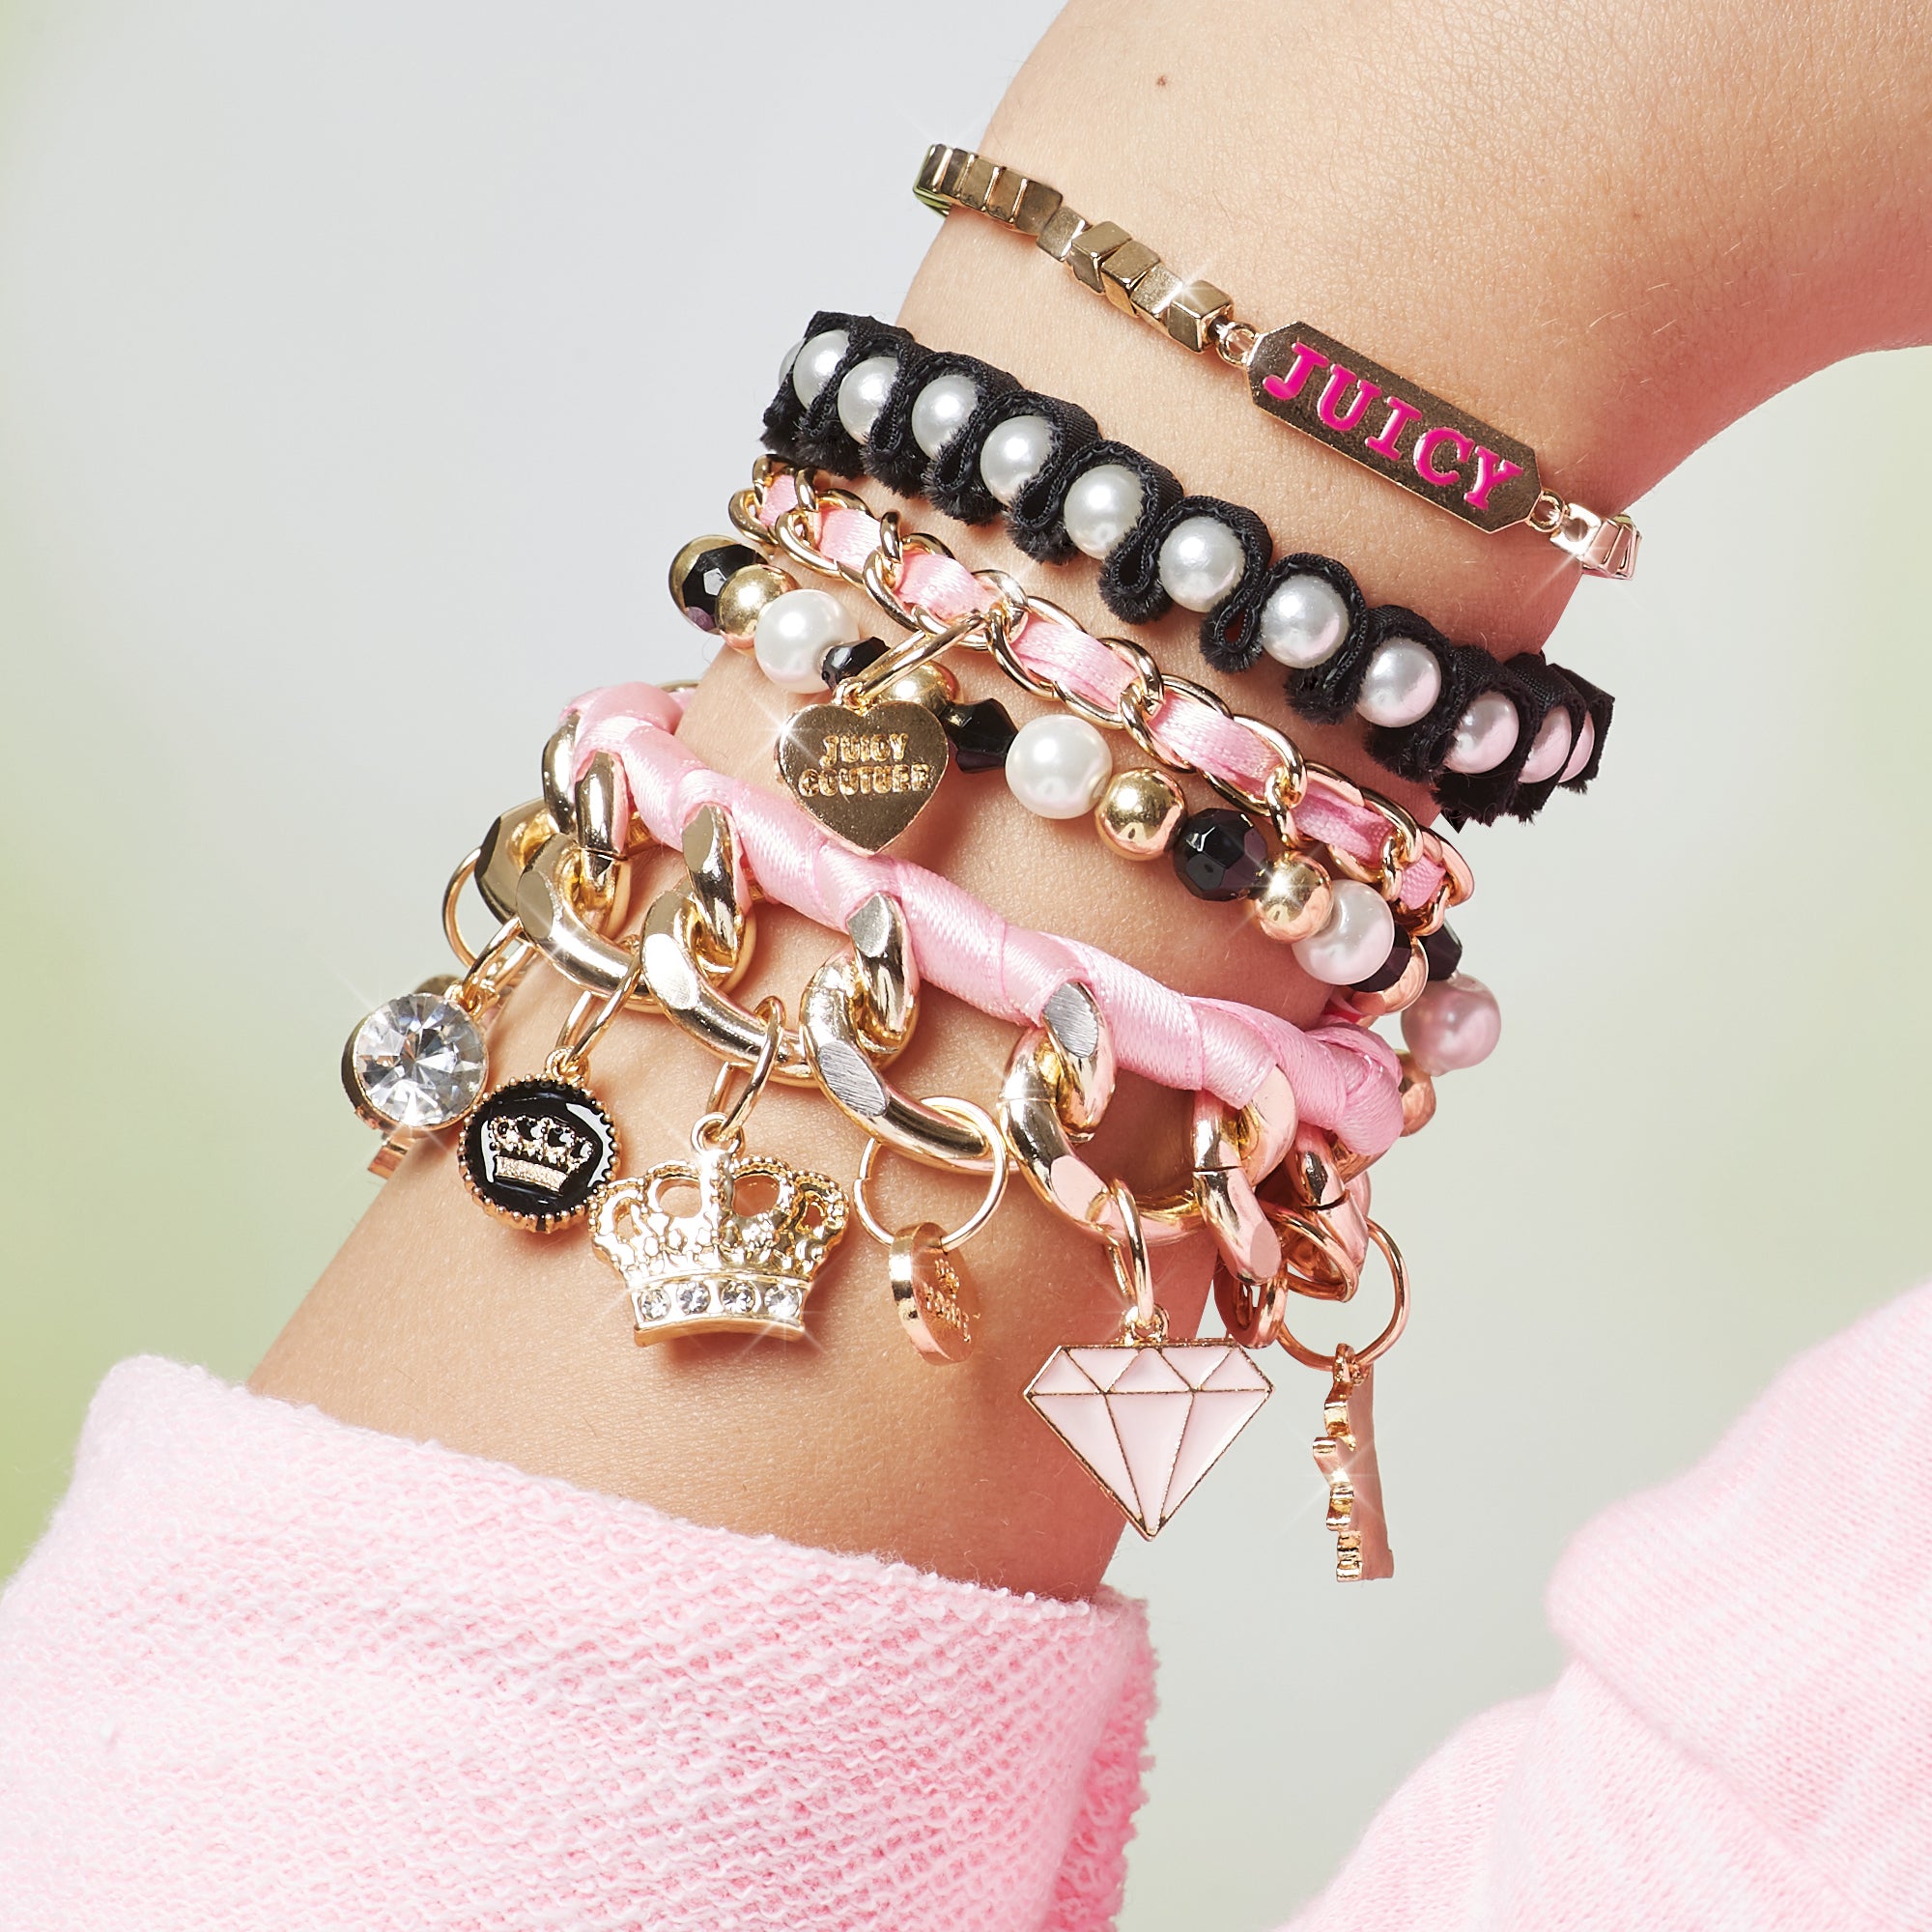 Juicy Couture™ Chains & Charms – Make It Real